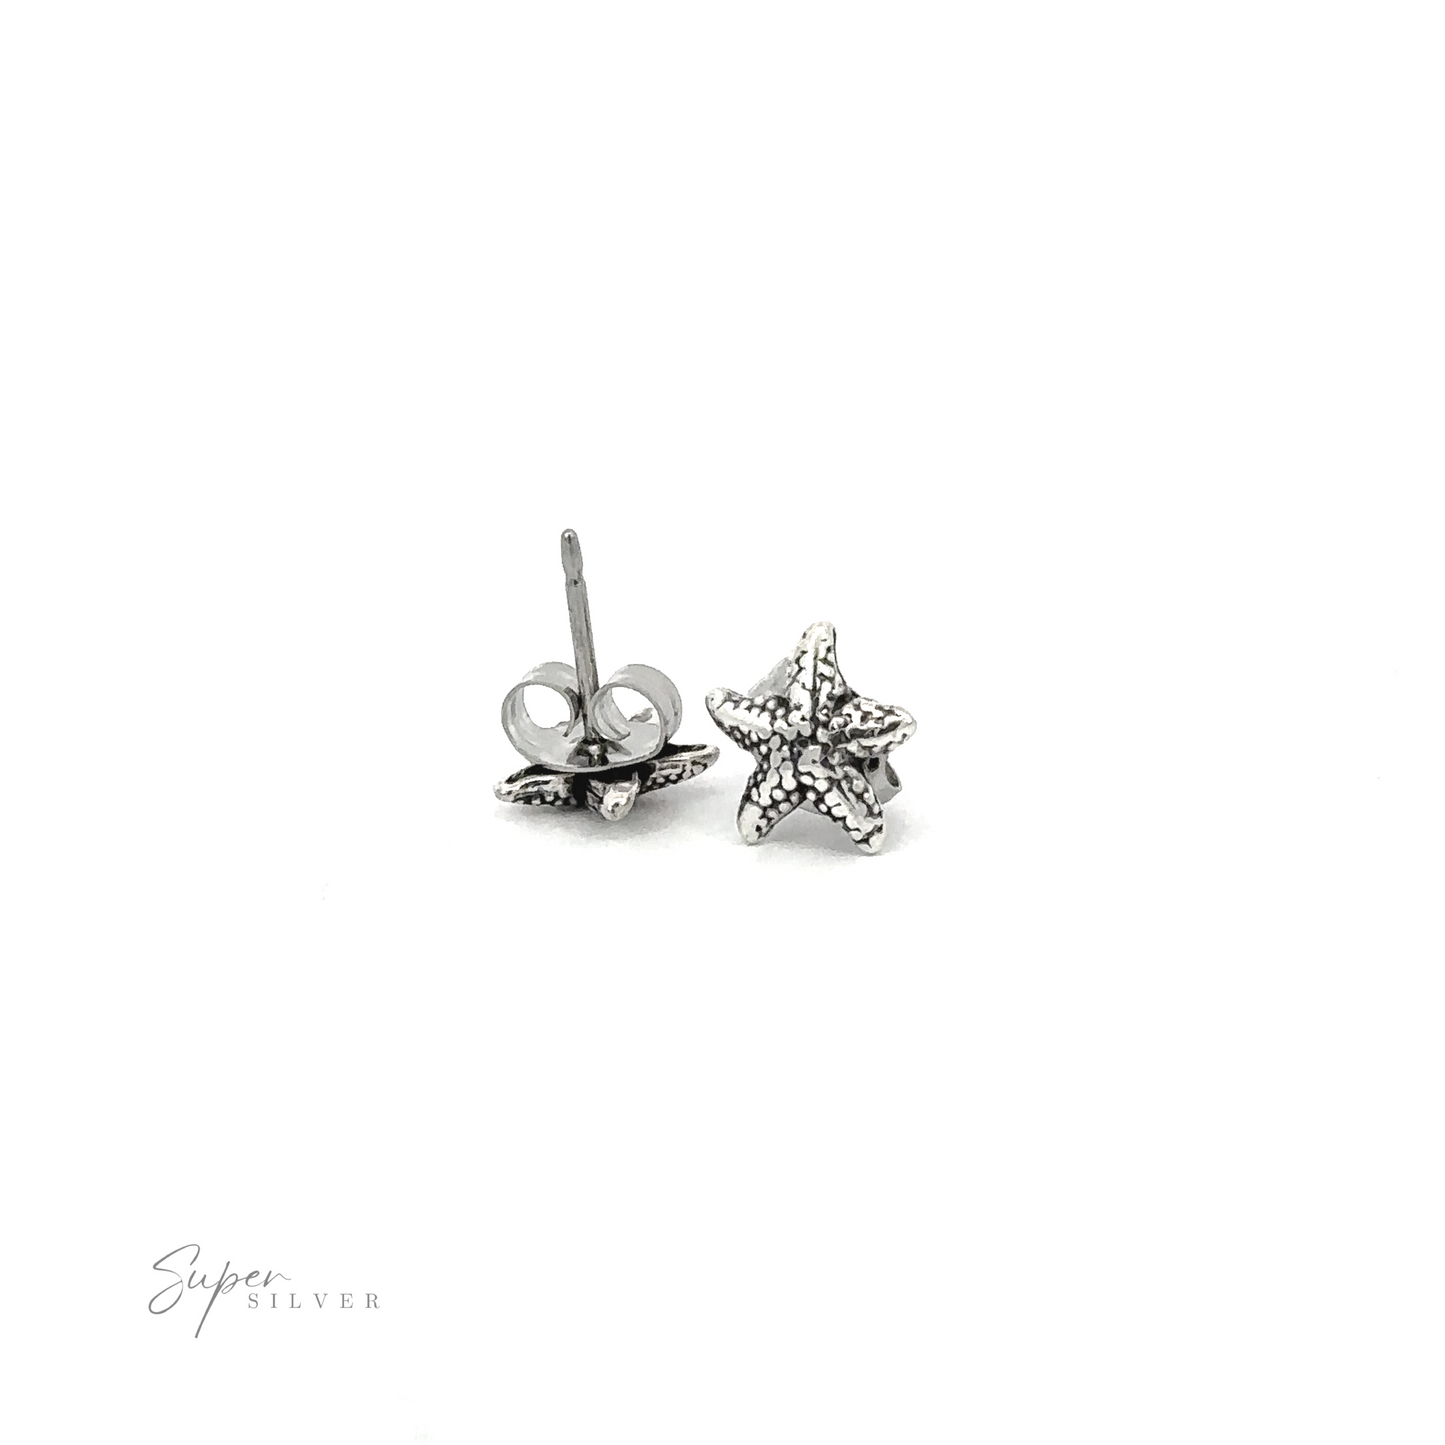 A pair of Star Fish Studs on a white background, perfect for coastal living and beach shores.